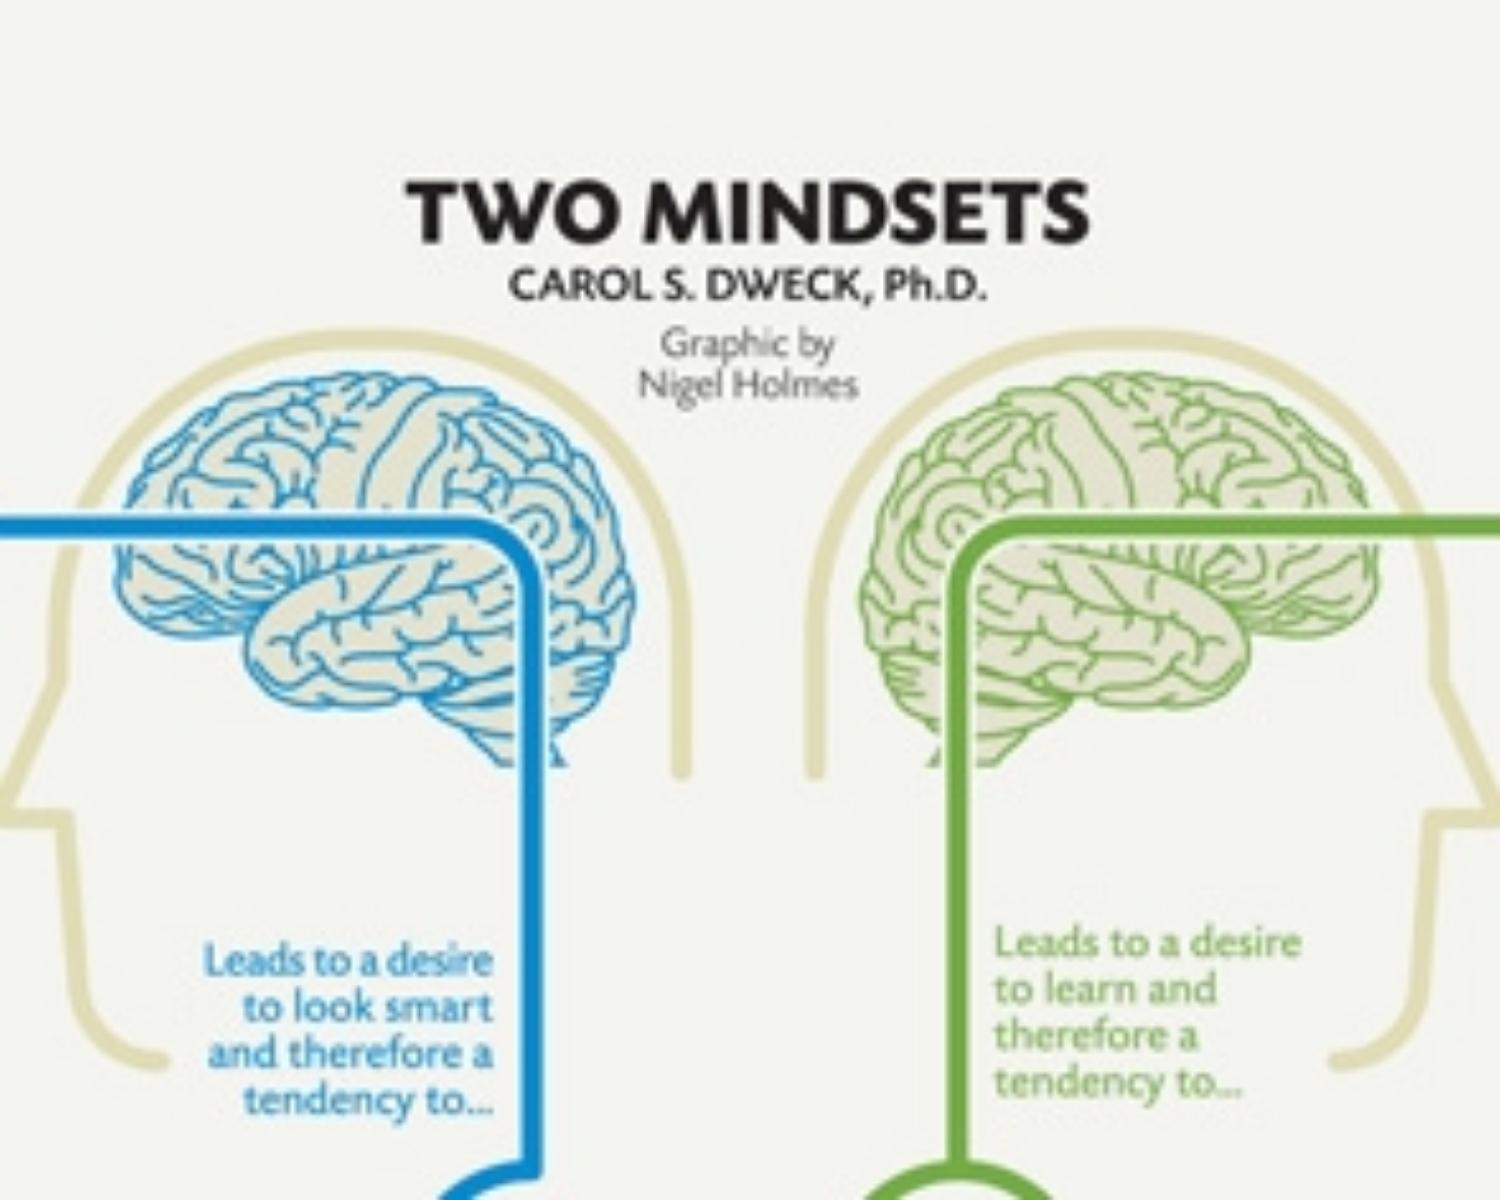 1.1 The Two Mindsets